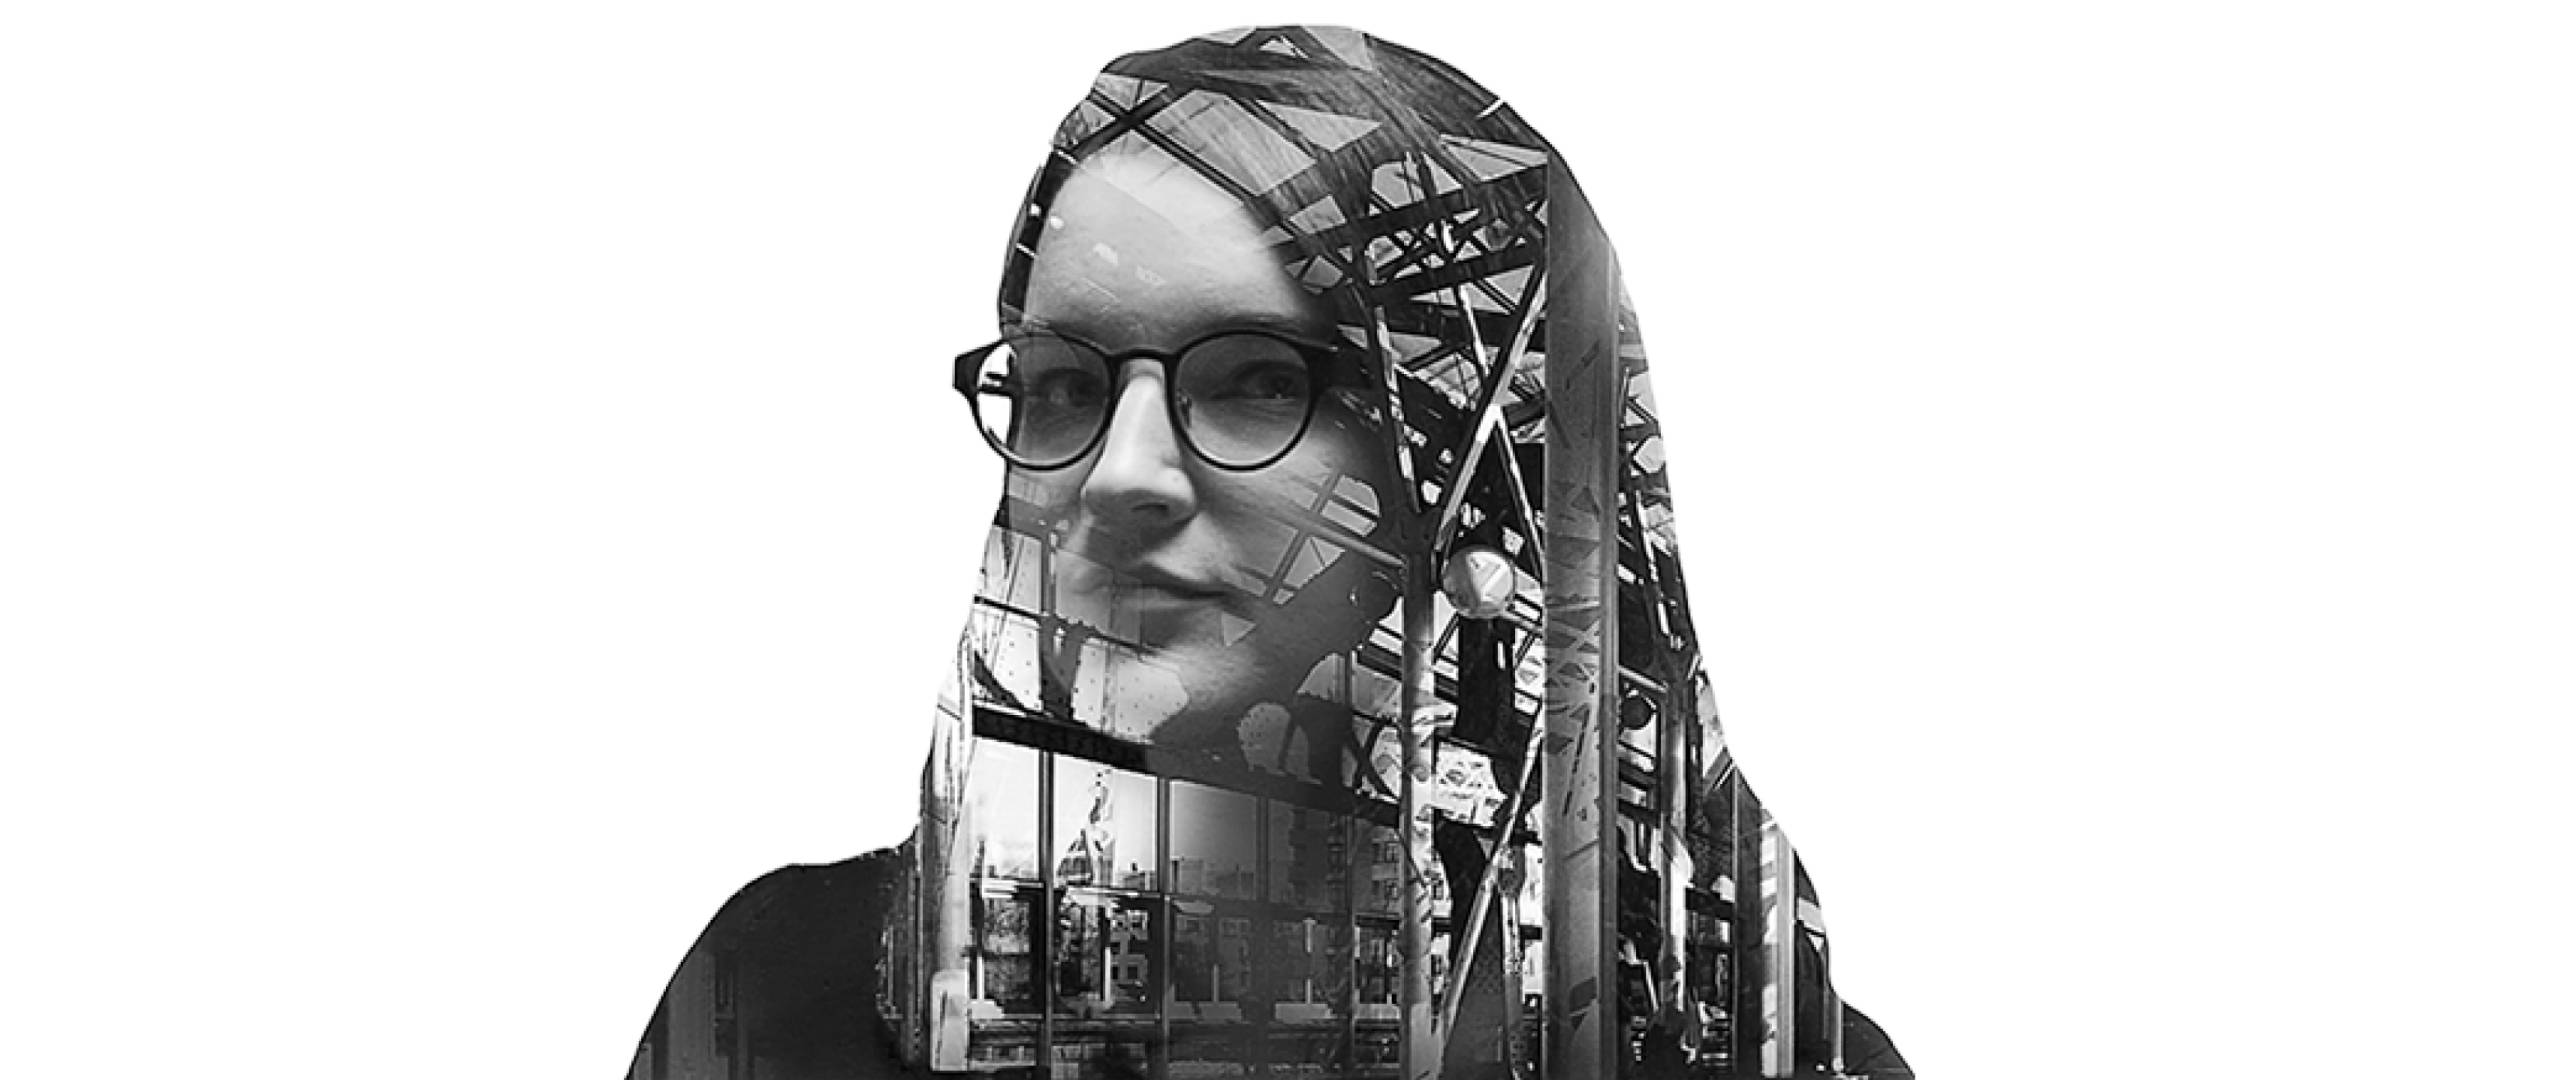 Monochrome image of woman blended with image of a building